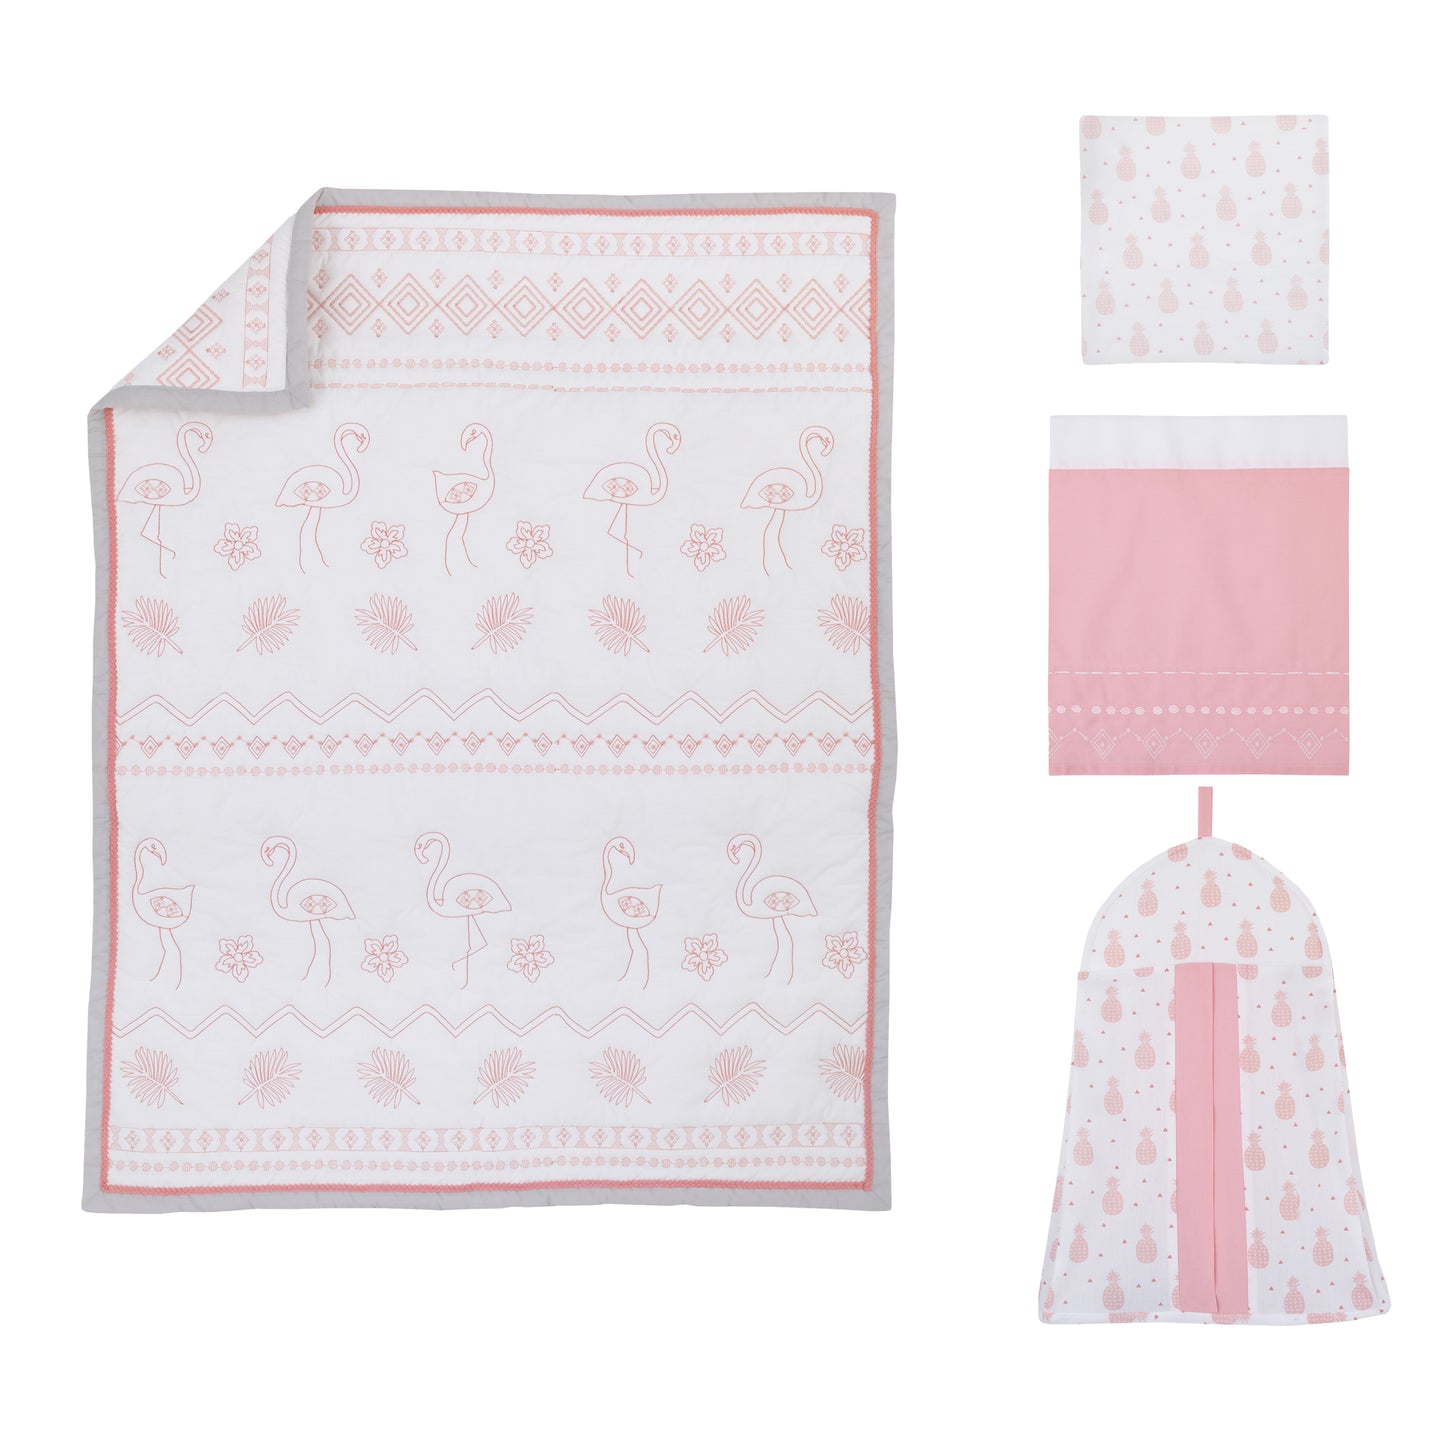 NoJo Tropical Flamingo Pink & White 100% Cotton 4 Piece Nursery Crib Bedding Set - Embroidered Quilt, Fitted Sheet, Dust Ruffle, and Diaper Stacker